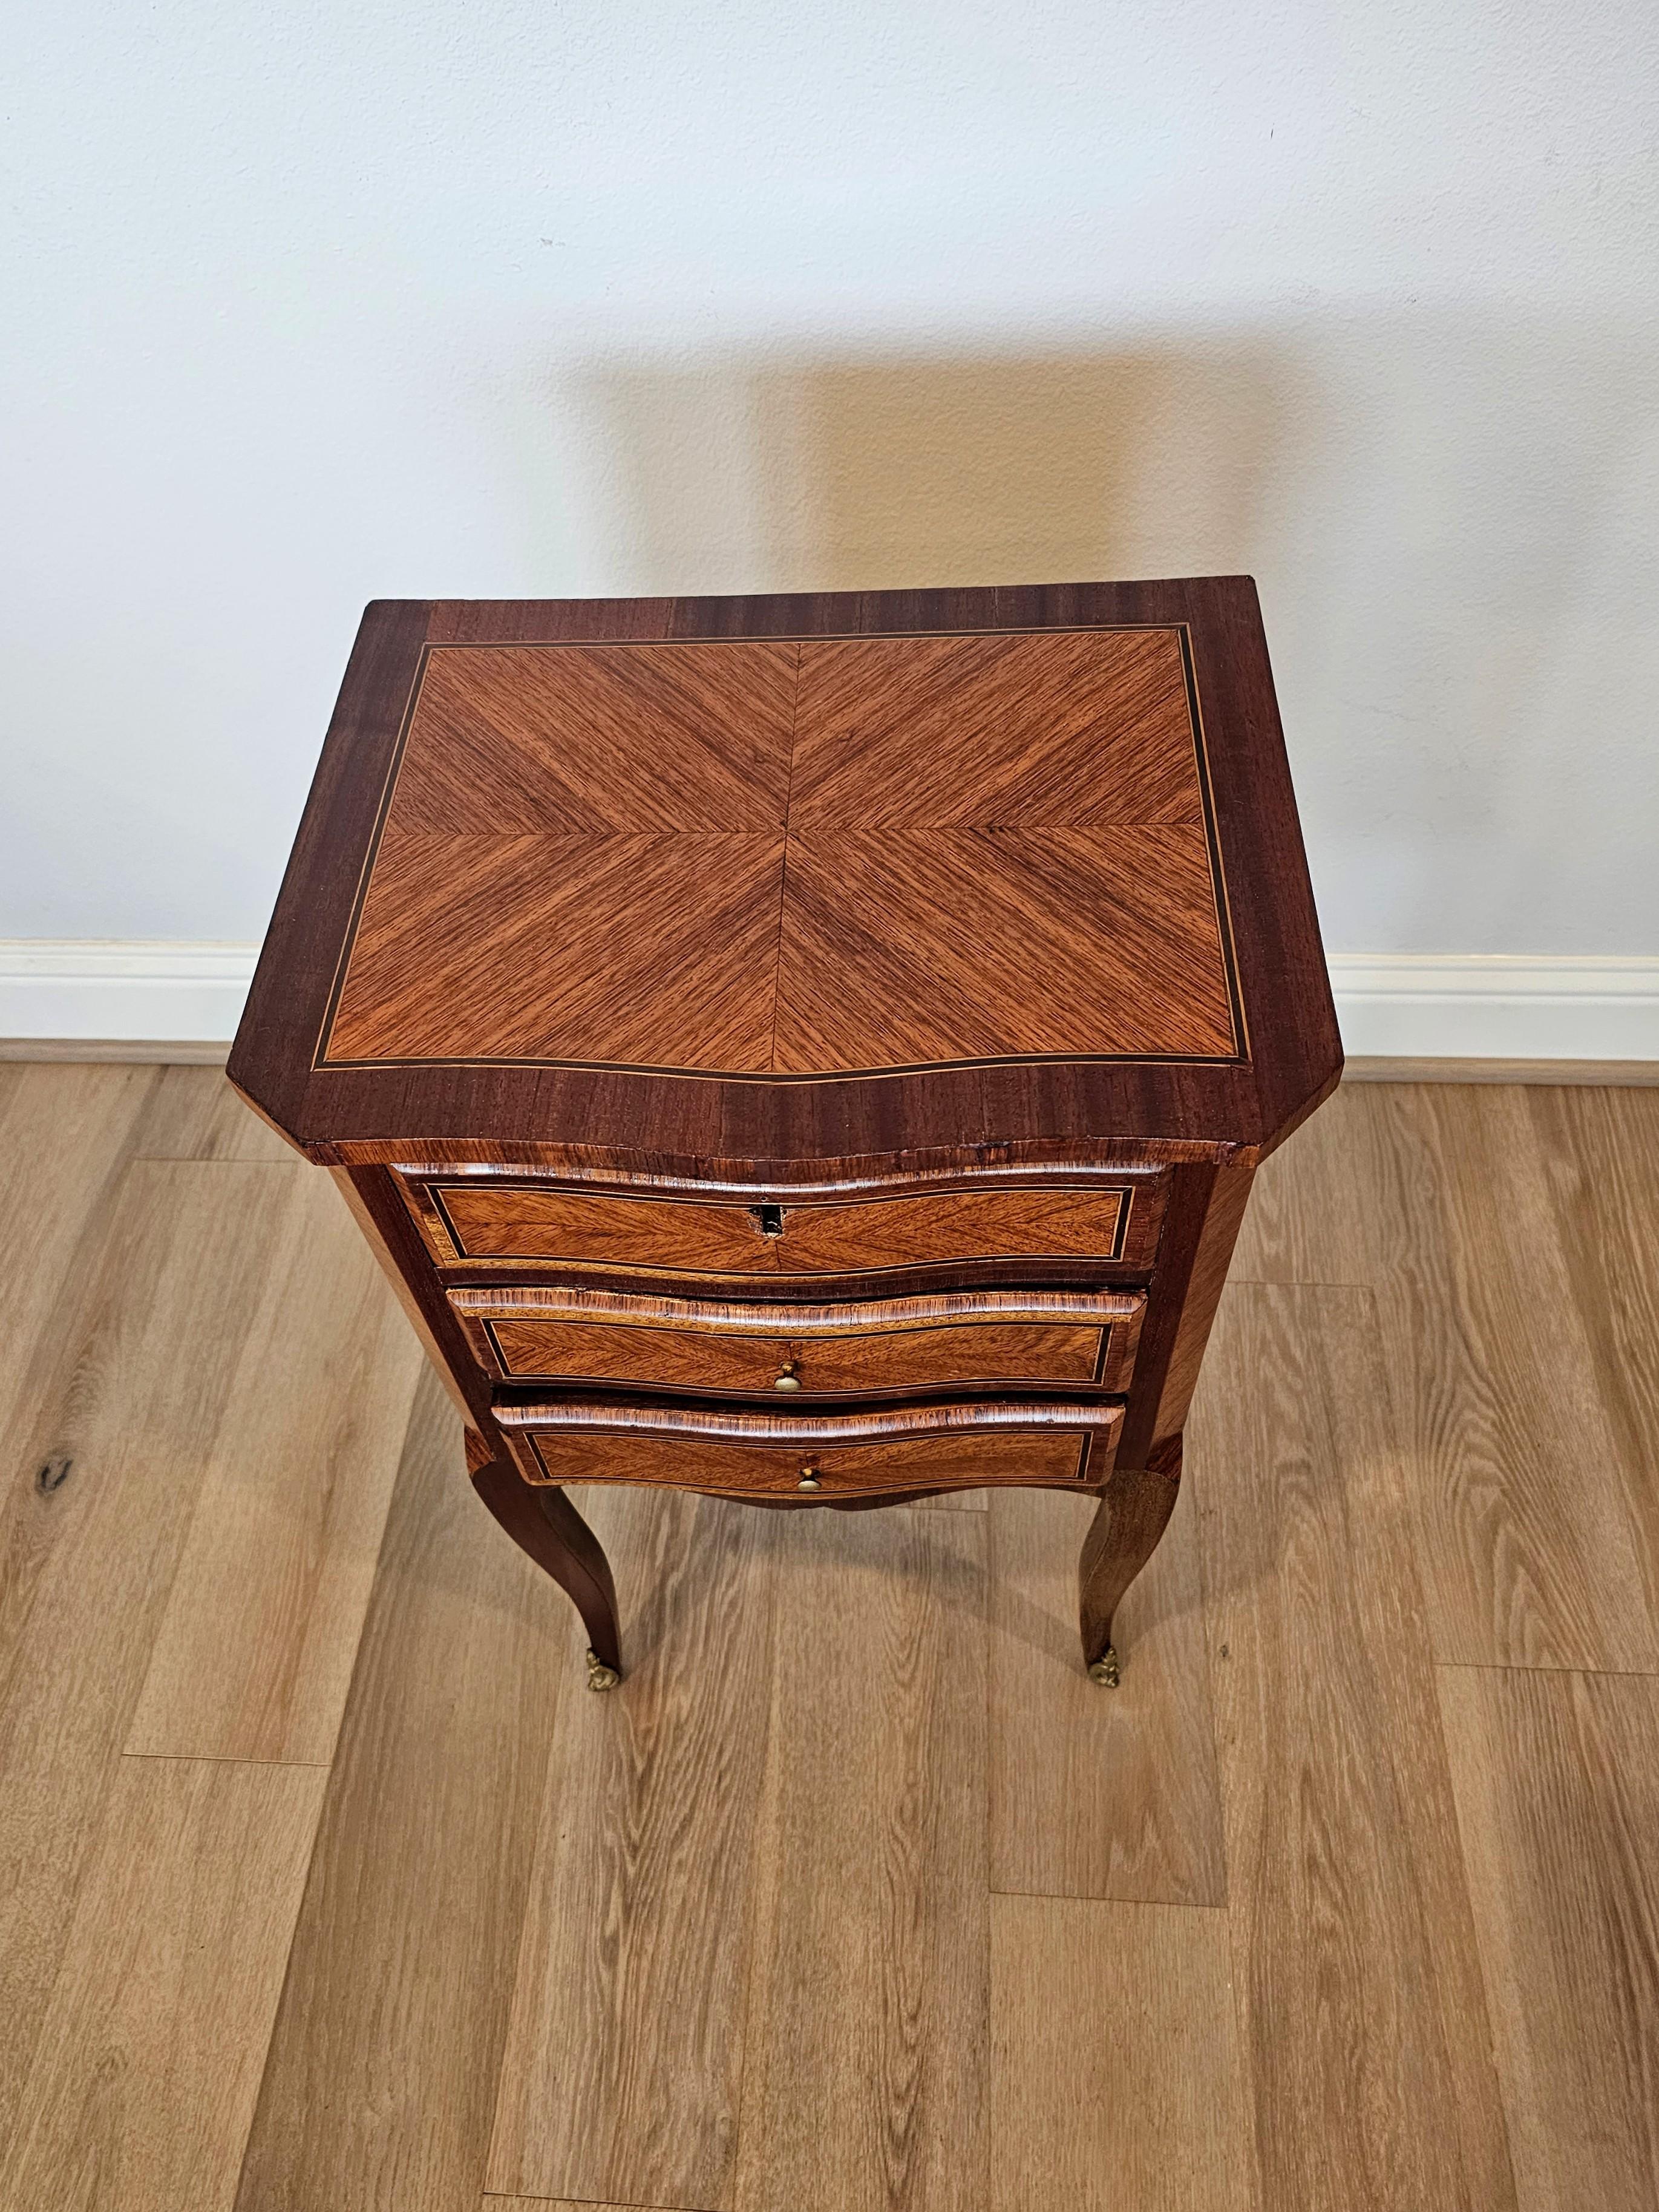 Antique French Louis XVI Style Kingwood Parquetry Mirrored Nightstand End Table In Fair Condition For Sale In Forney, TX